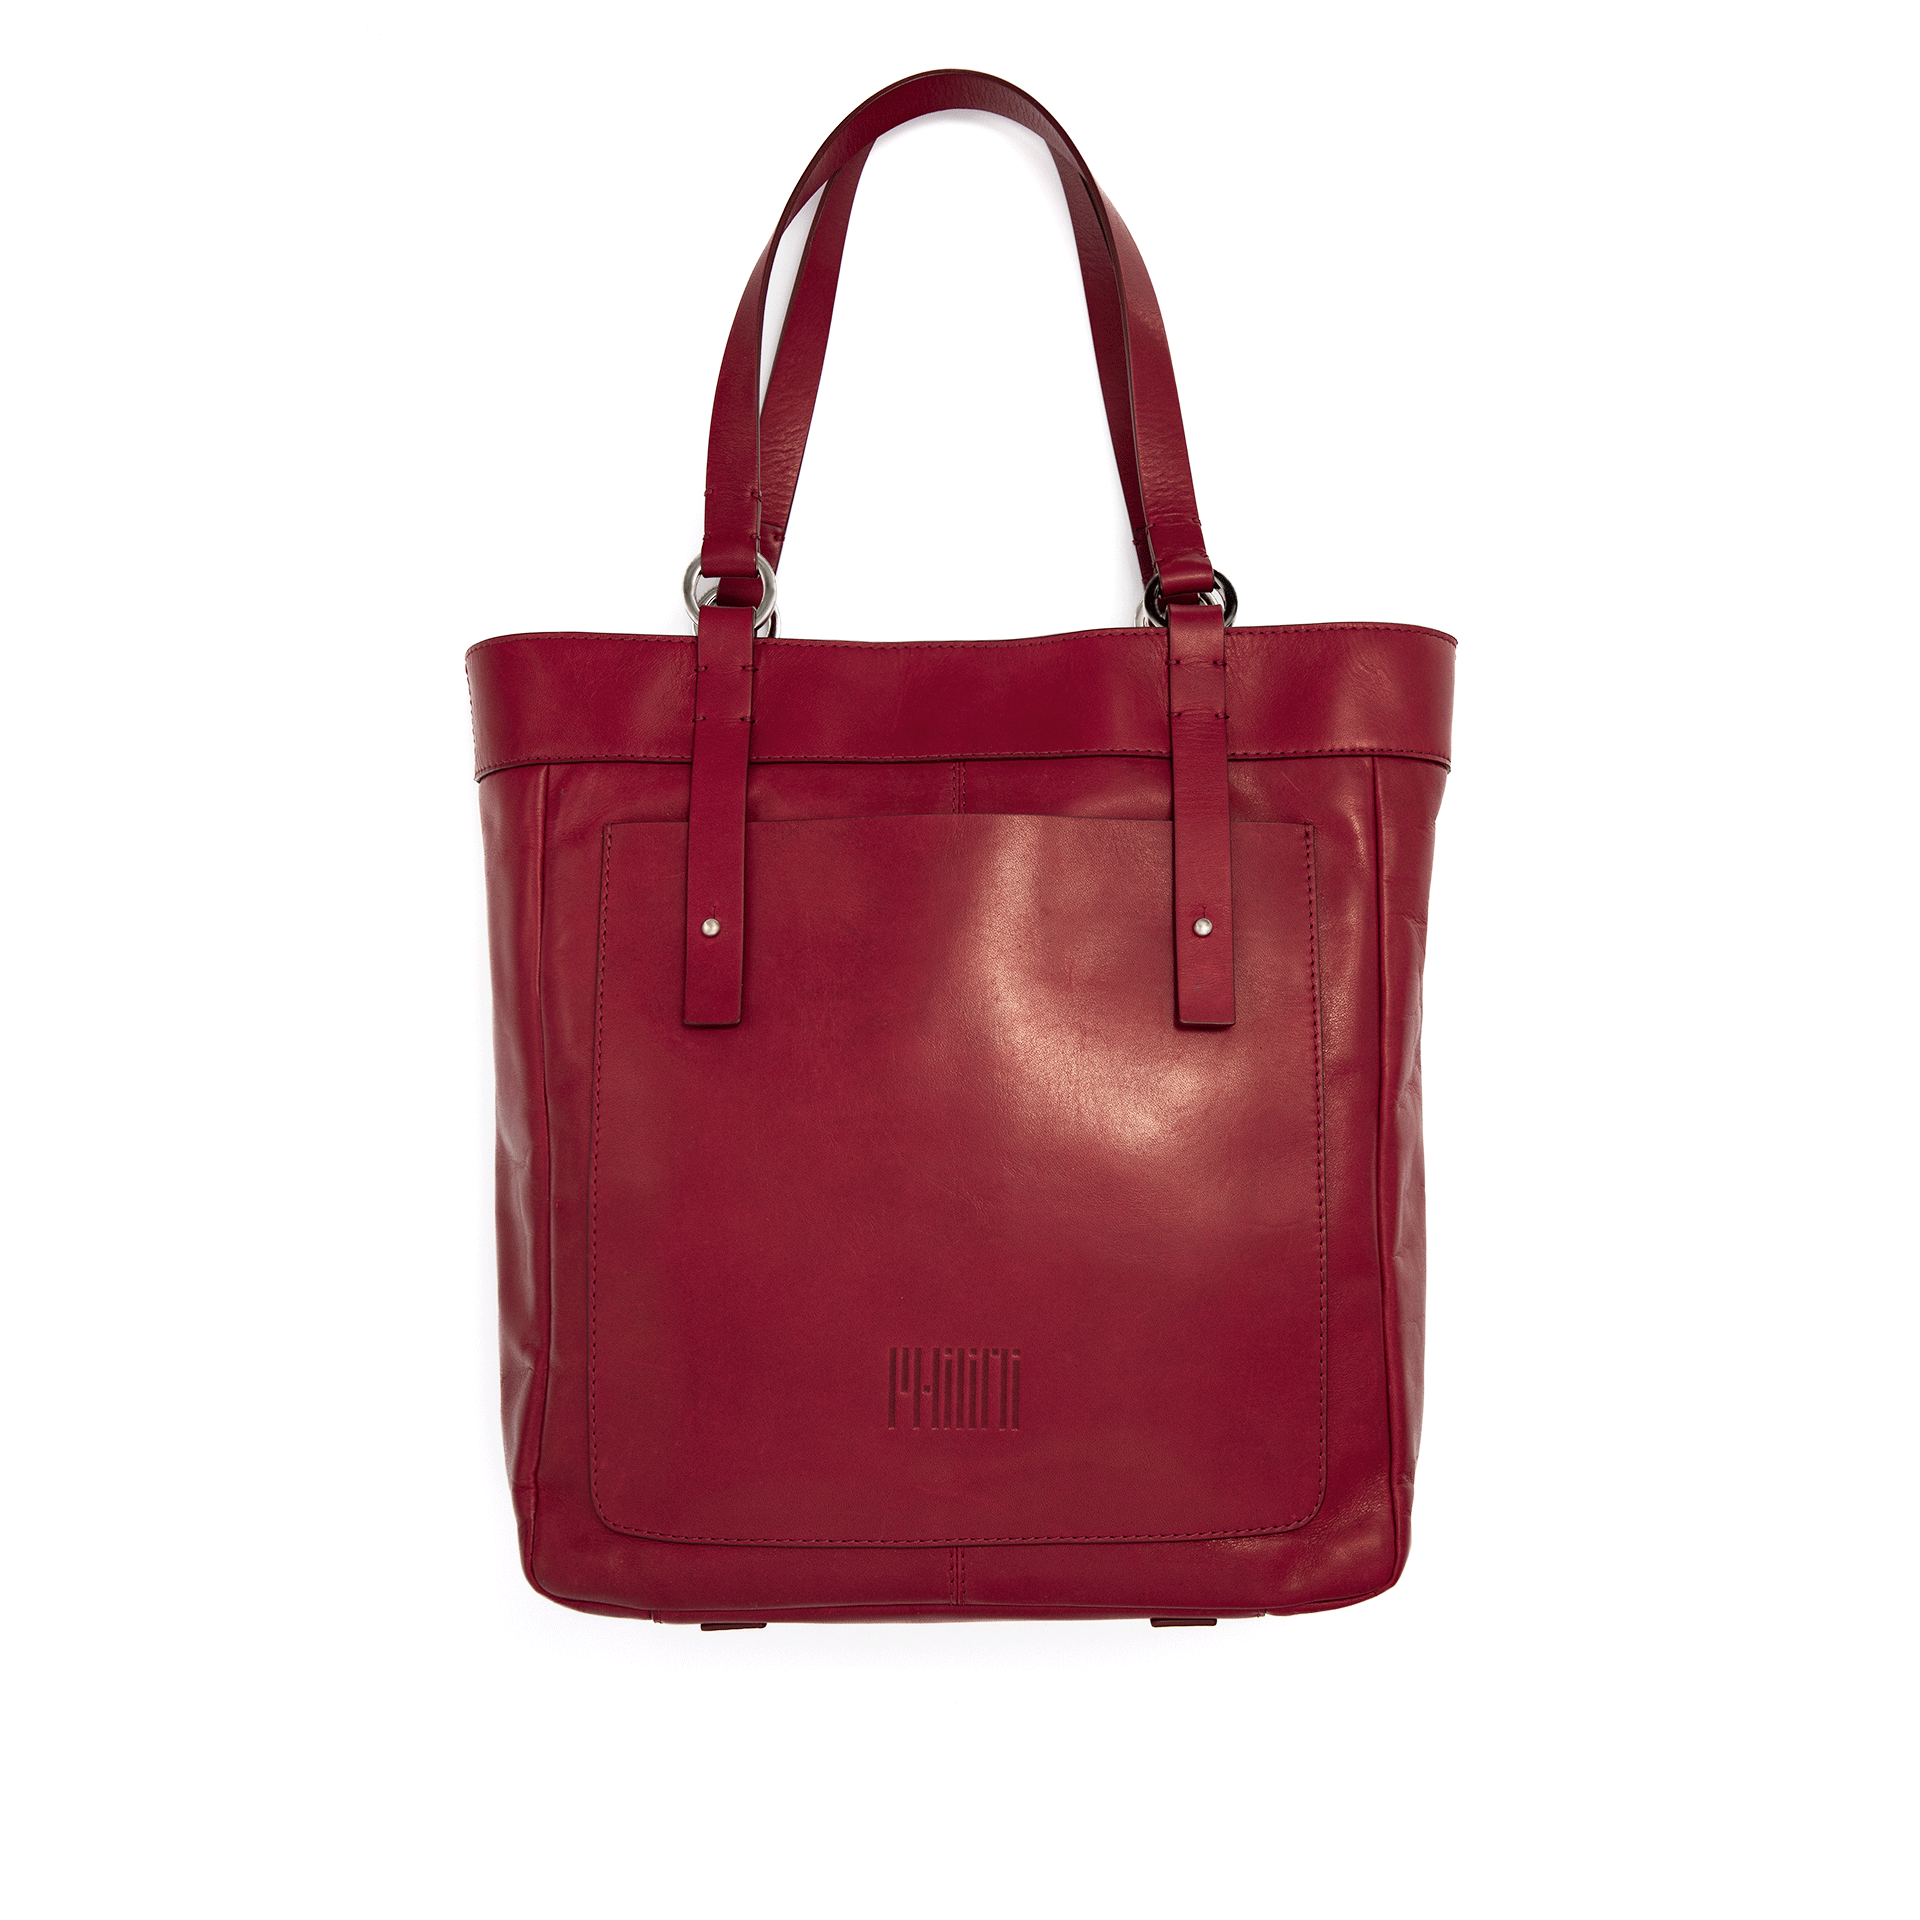 red-leather-tote-philini-elena- business bag-germany brand